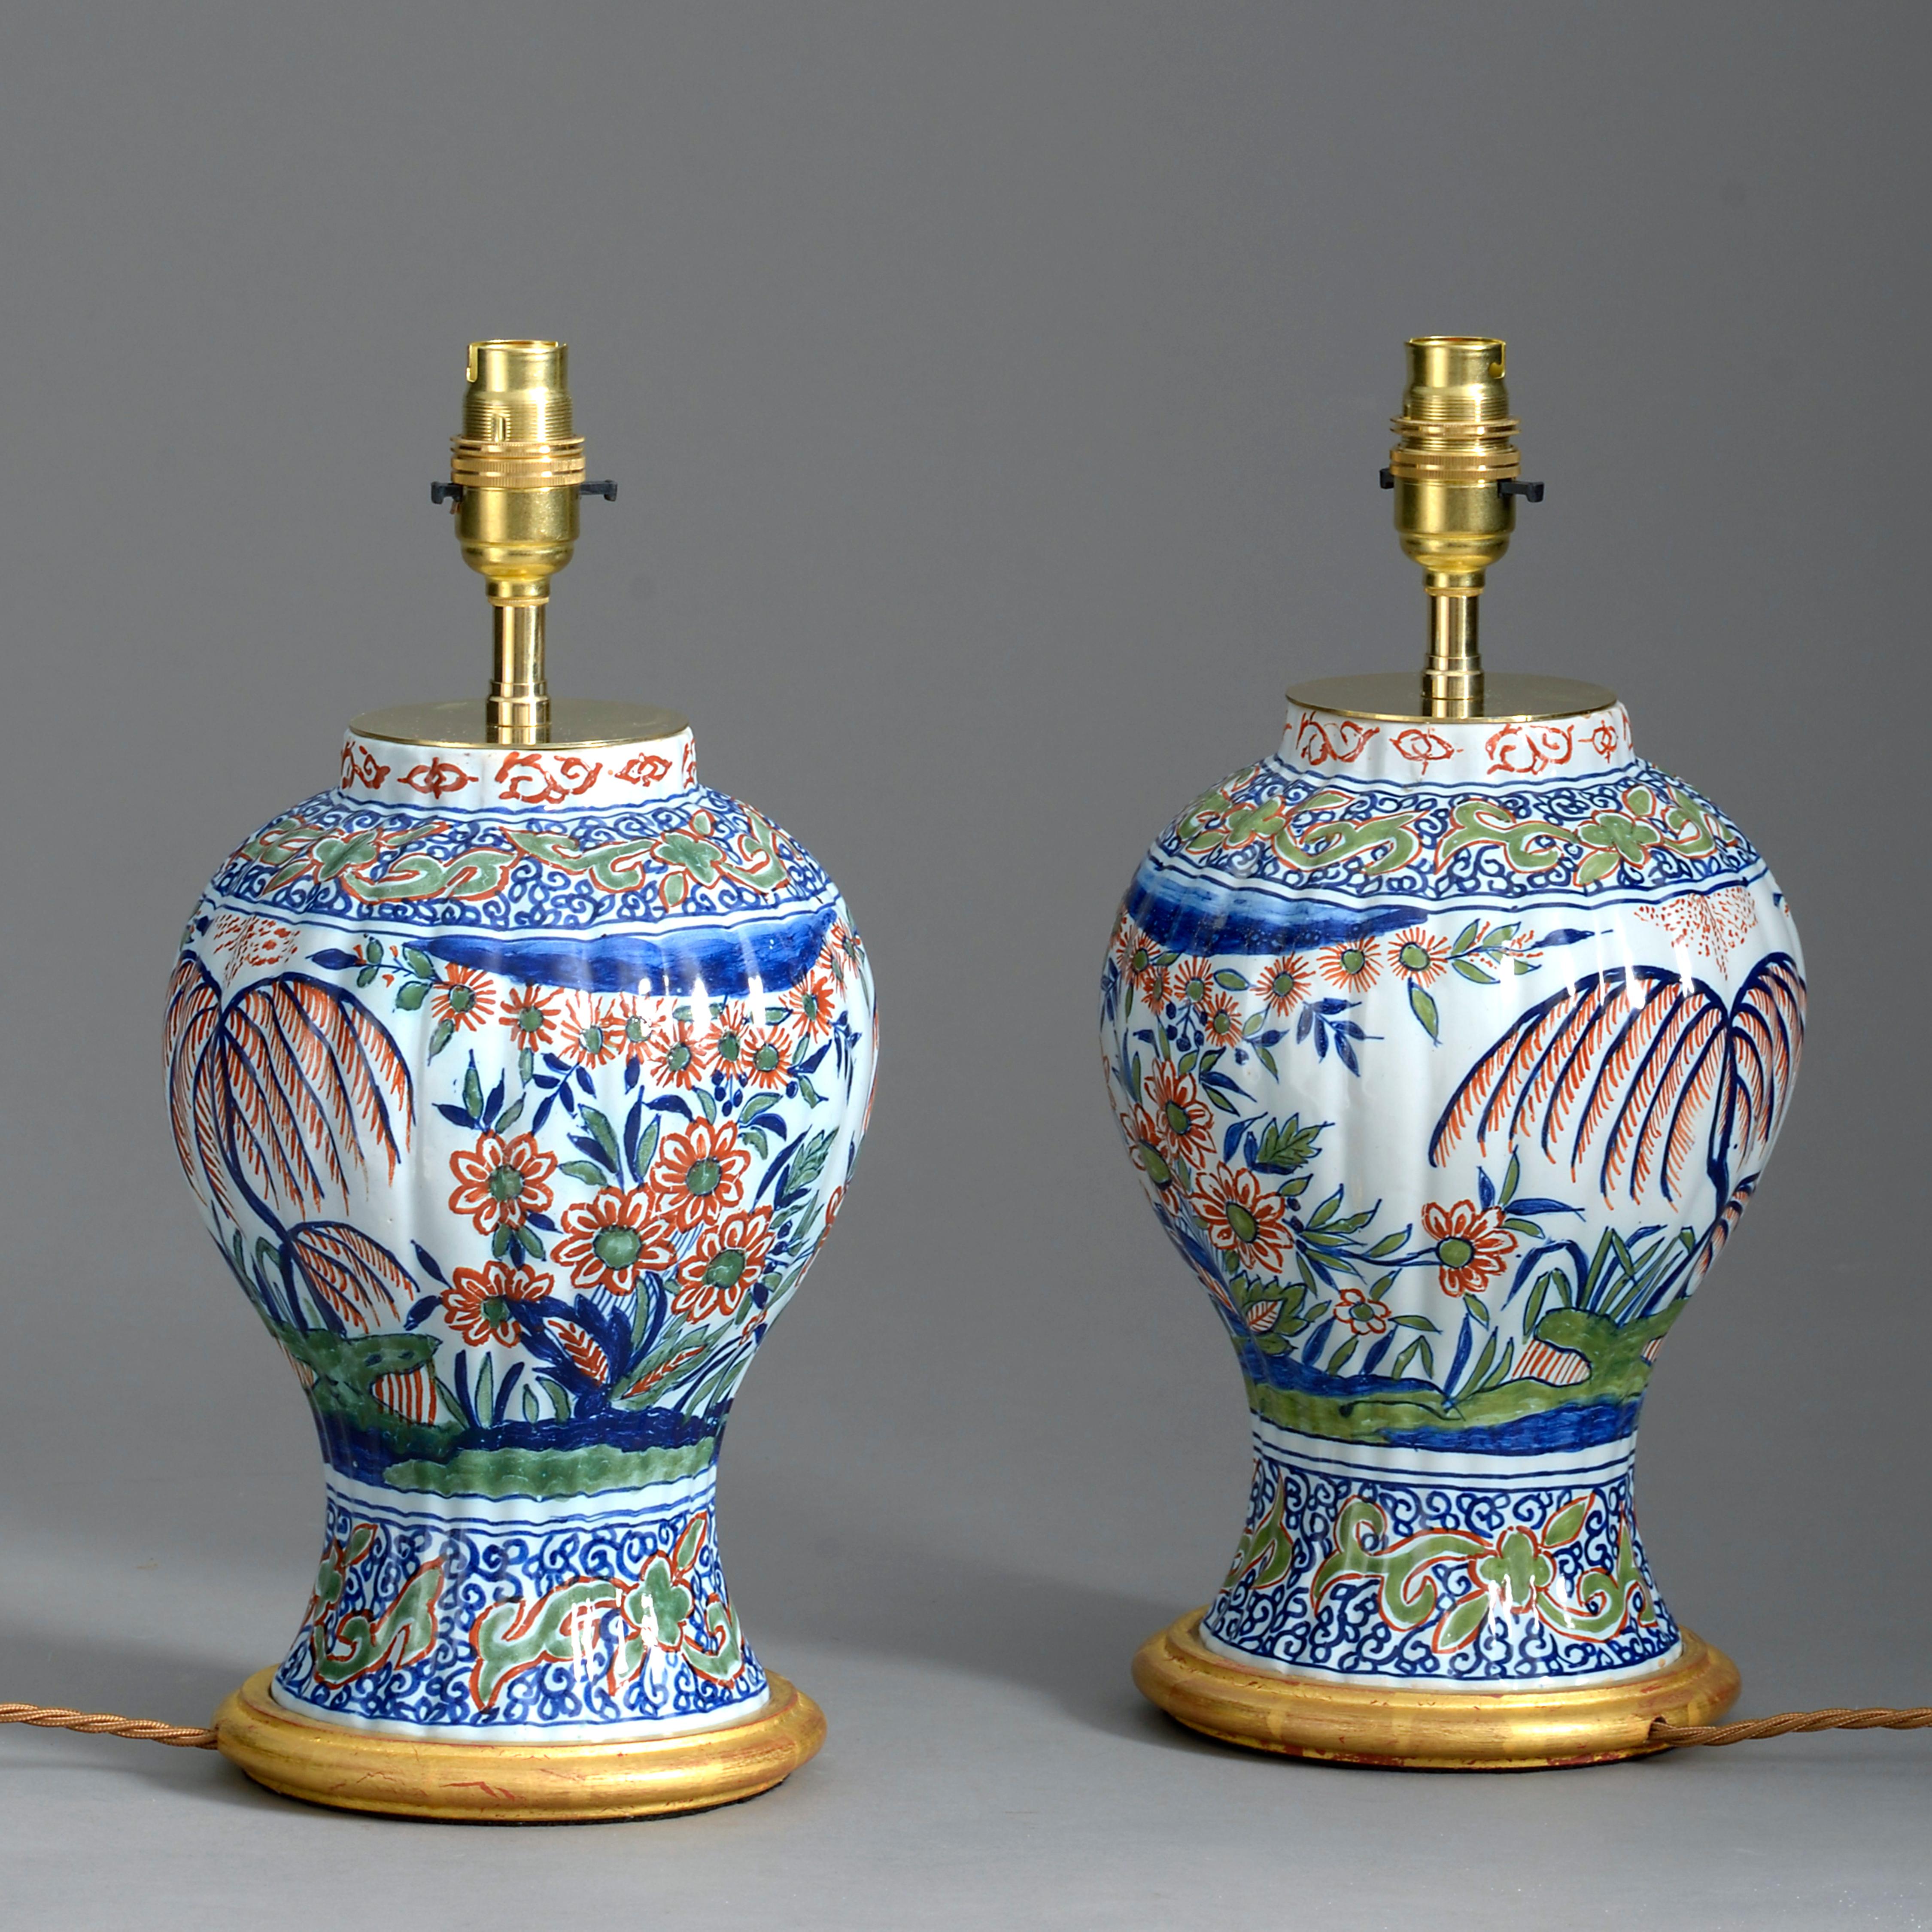 A pair of polychrome glazed delft vases of ribbed baluster form, decorated throughout with chinoiserie. Now mounted on turned water gilded bases as table lamps.

Height dimensions refer to height of pottery vases only.

Wired and tested for UK